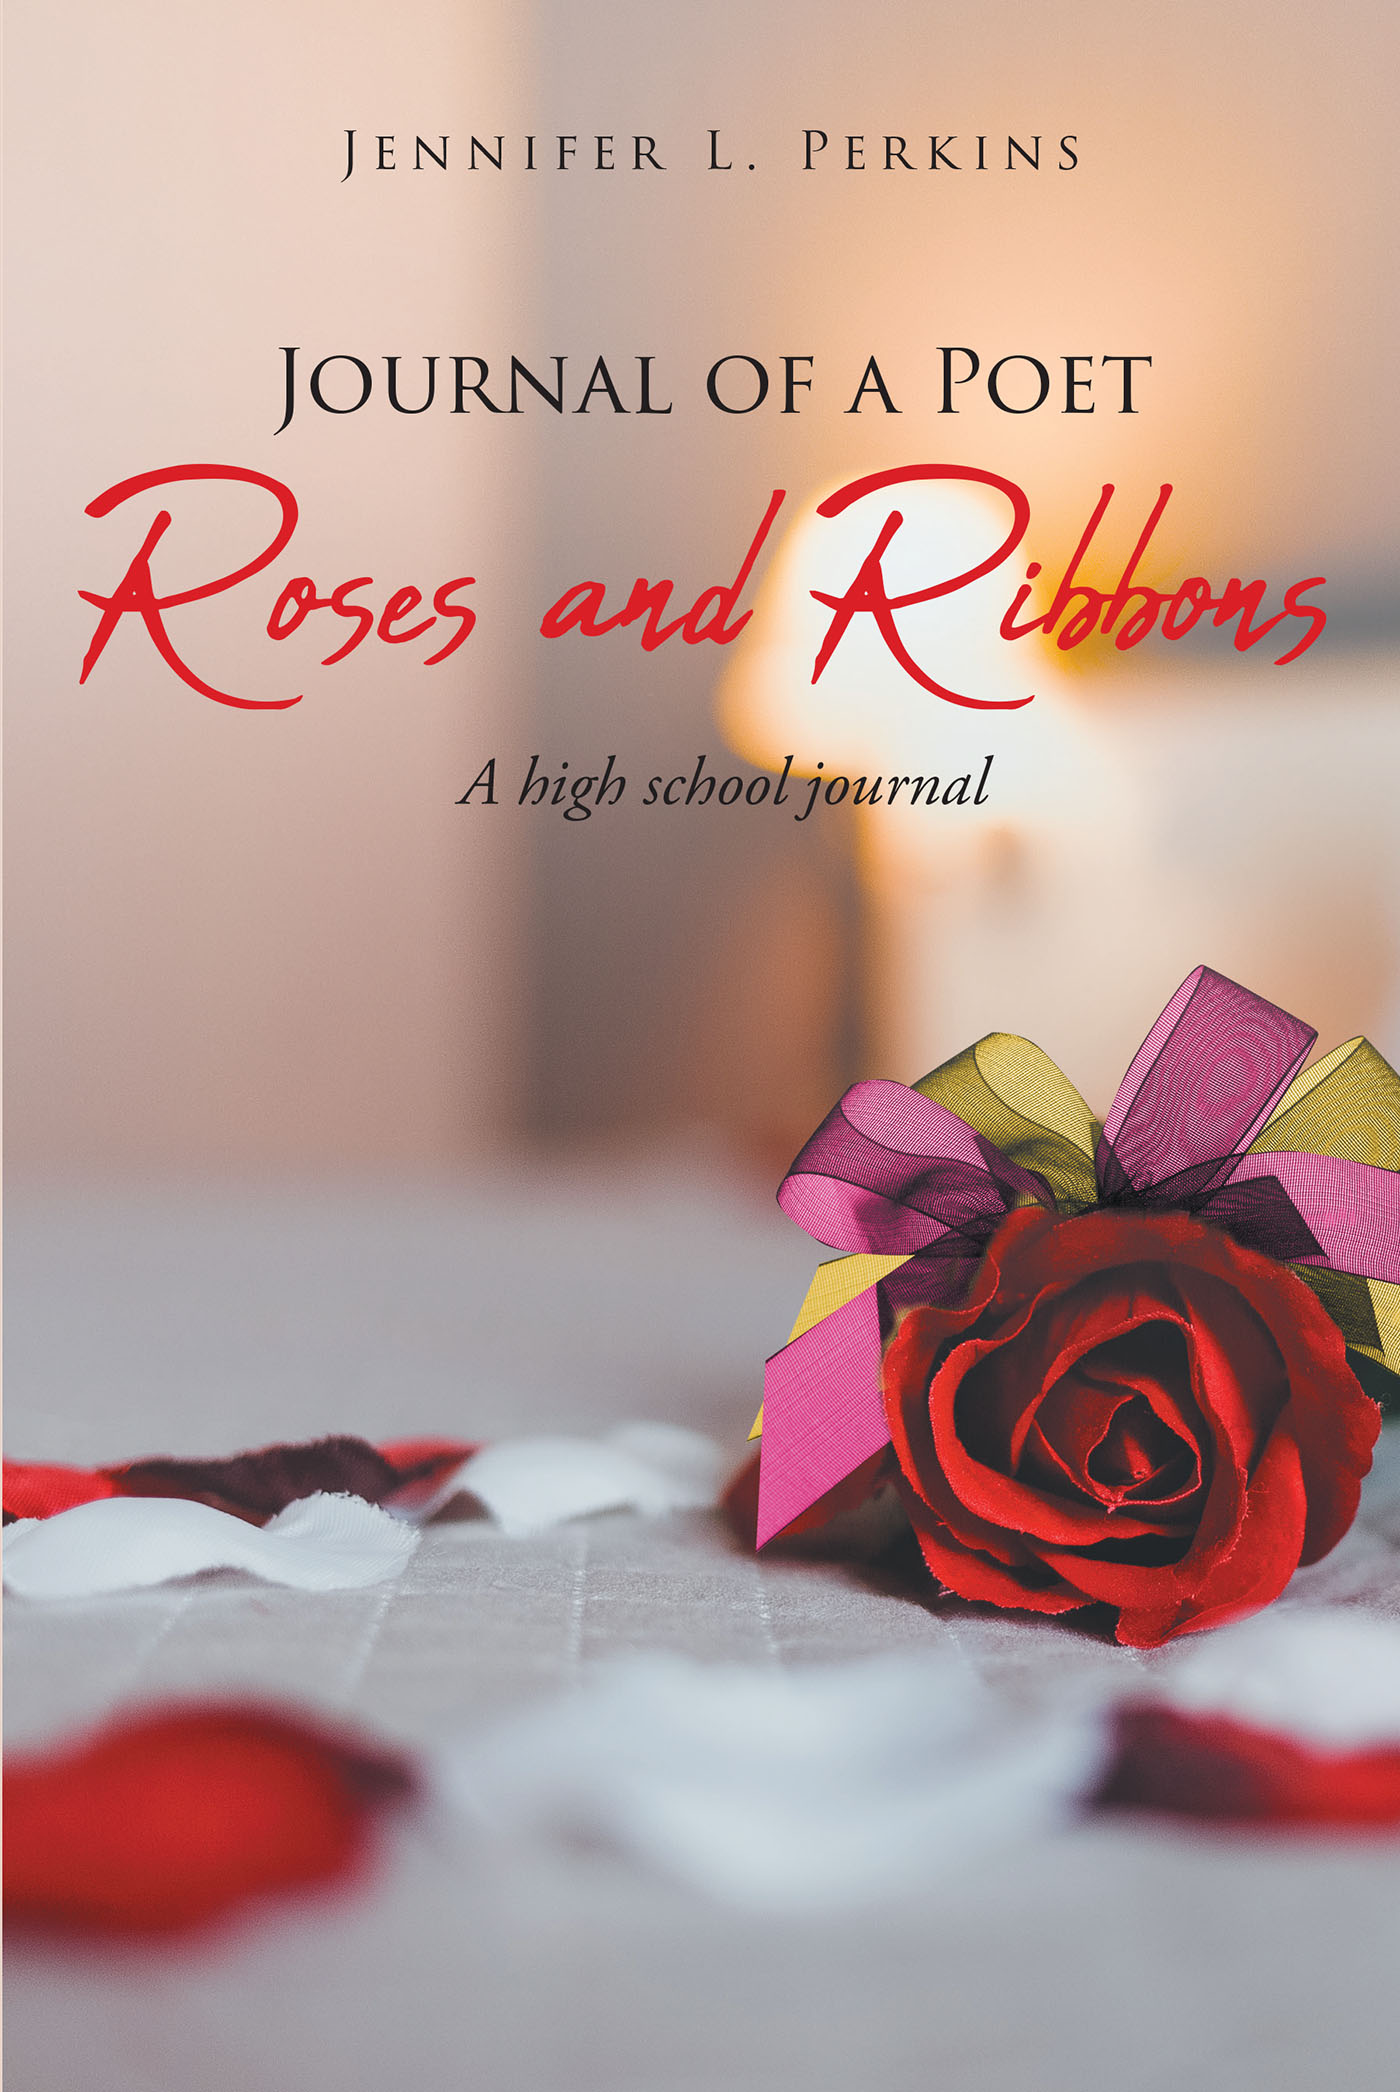 Author Jennifer L. Perkins’s New Book, "Journal of a Poet: Roses and Ribbons," is an Enthralling Look at Who the Author Was During Her Years in High School